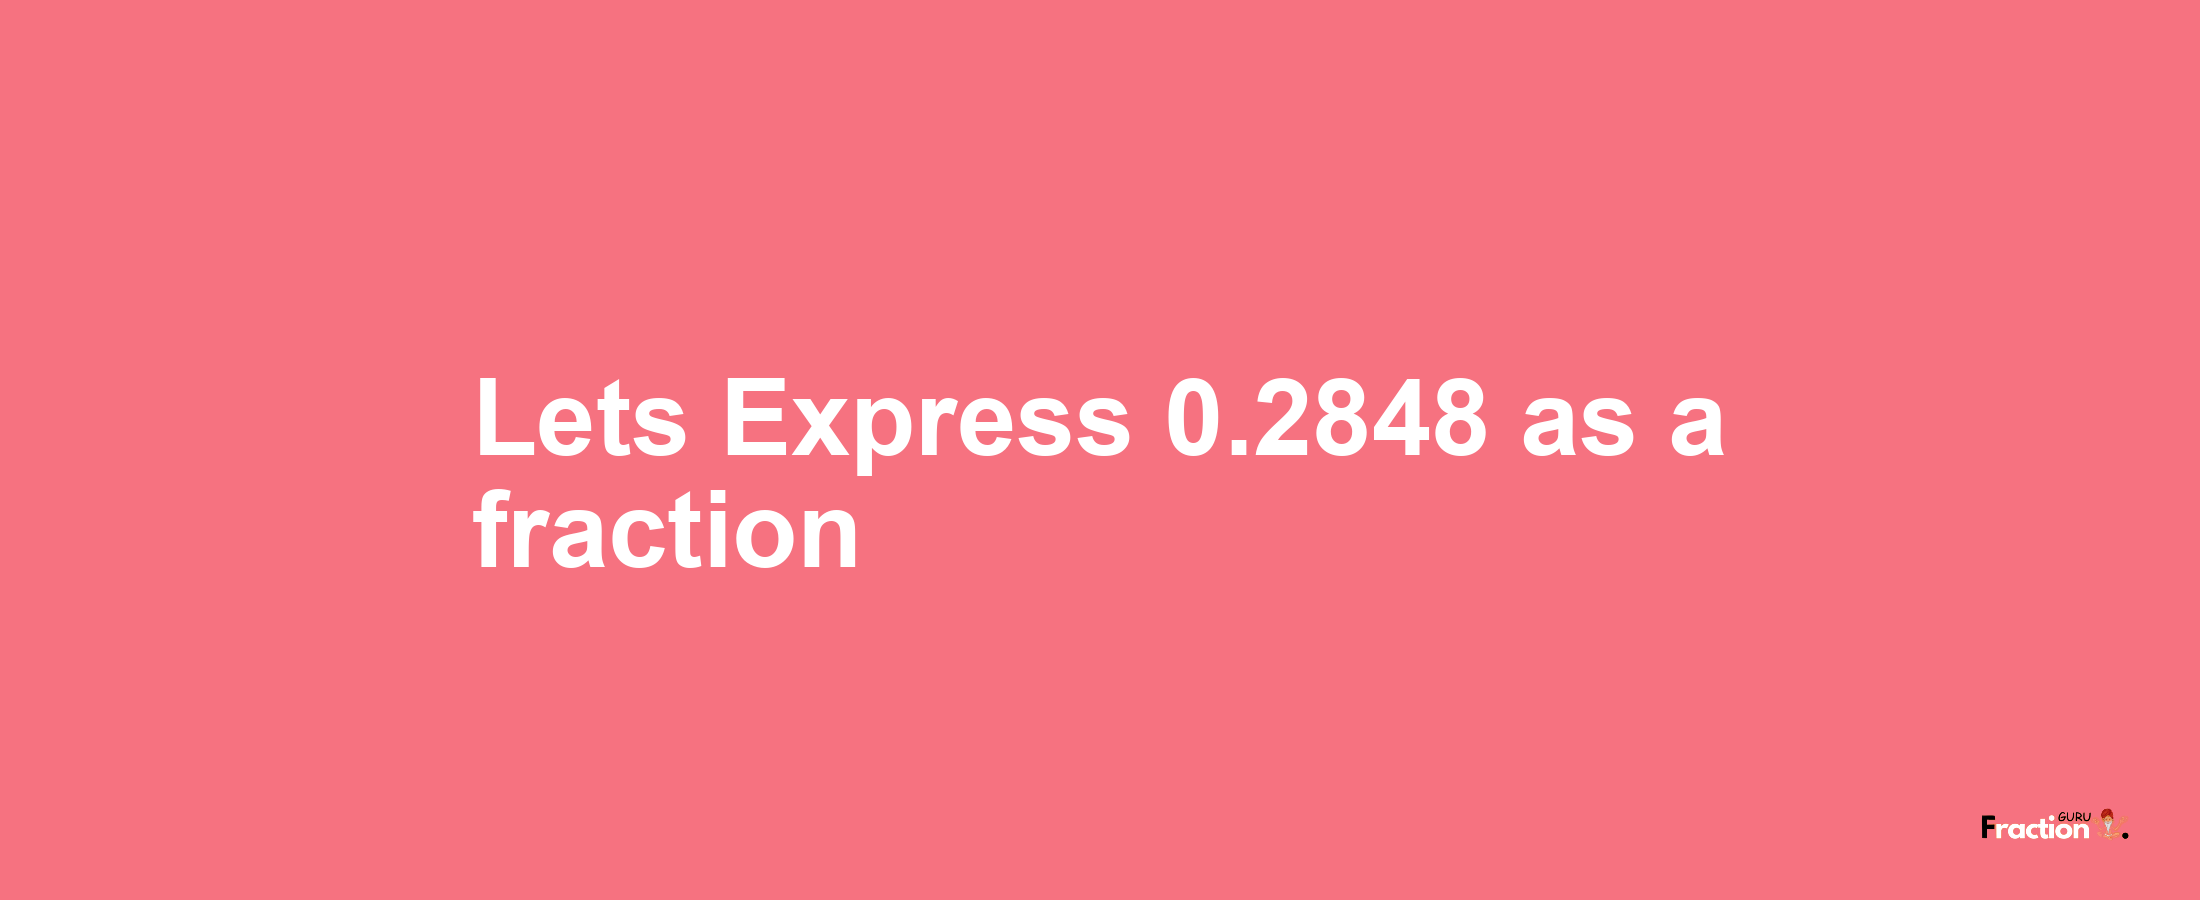 Lets Express 0.2848 as afraction